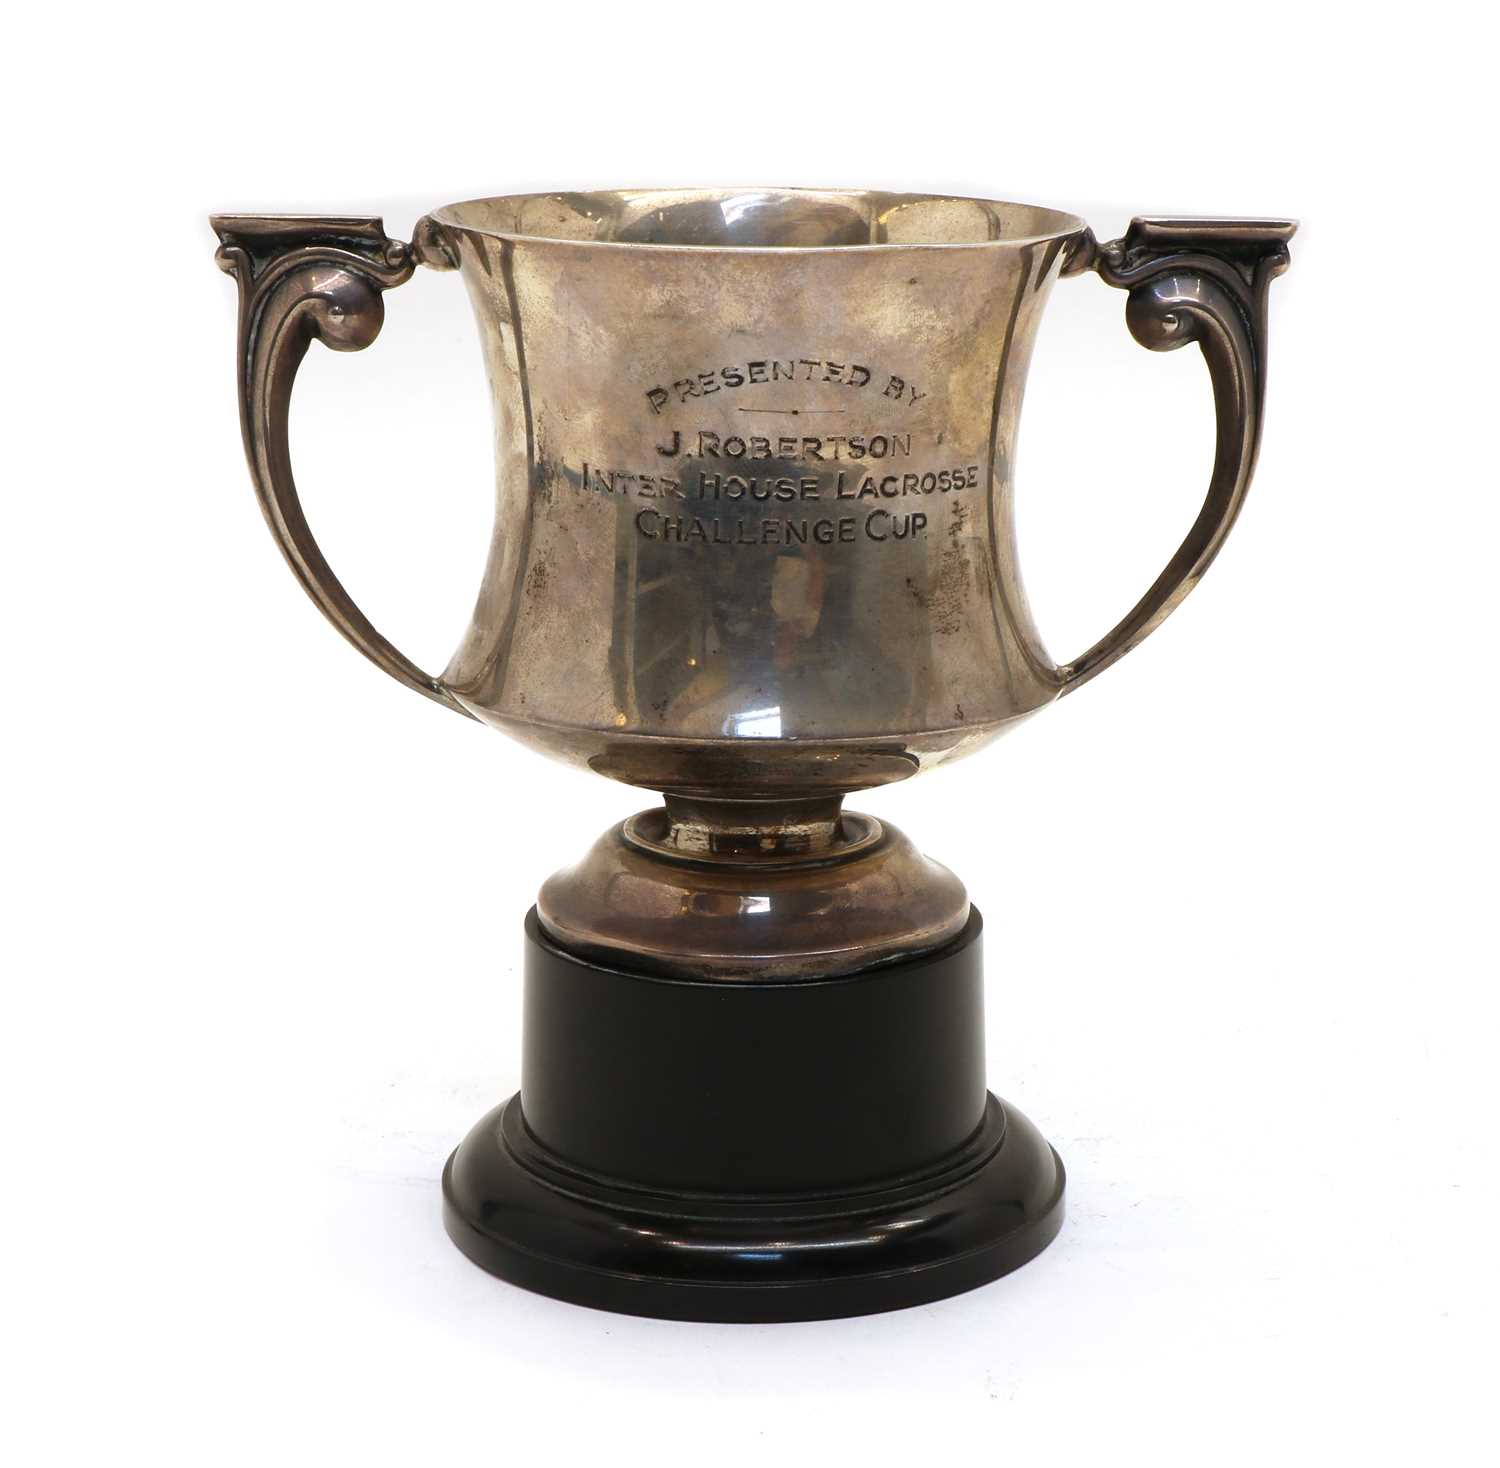 Lot 42 - Inter House Lacrosse Challenge Cup, Princess Helena College